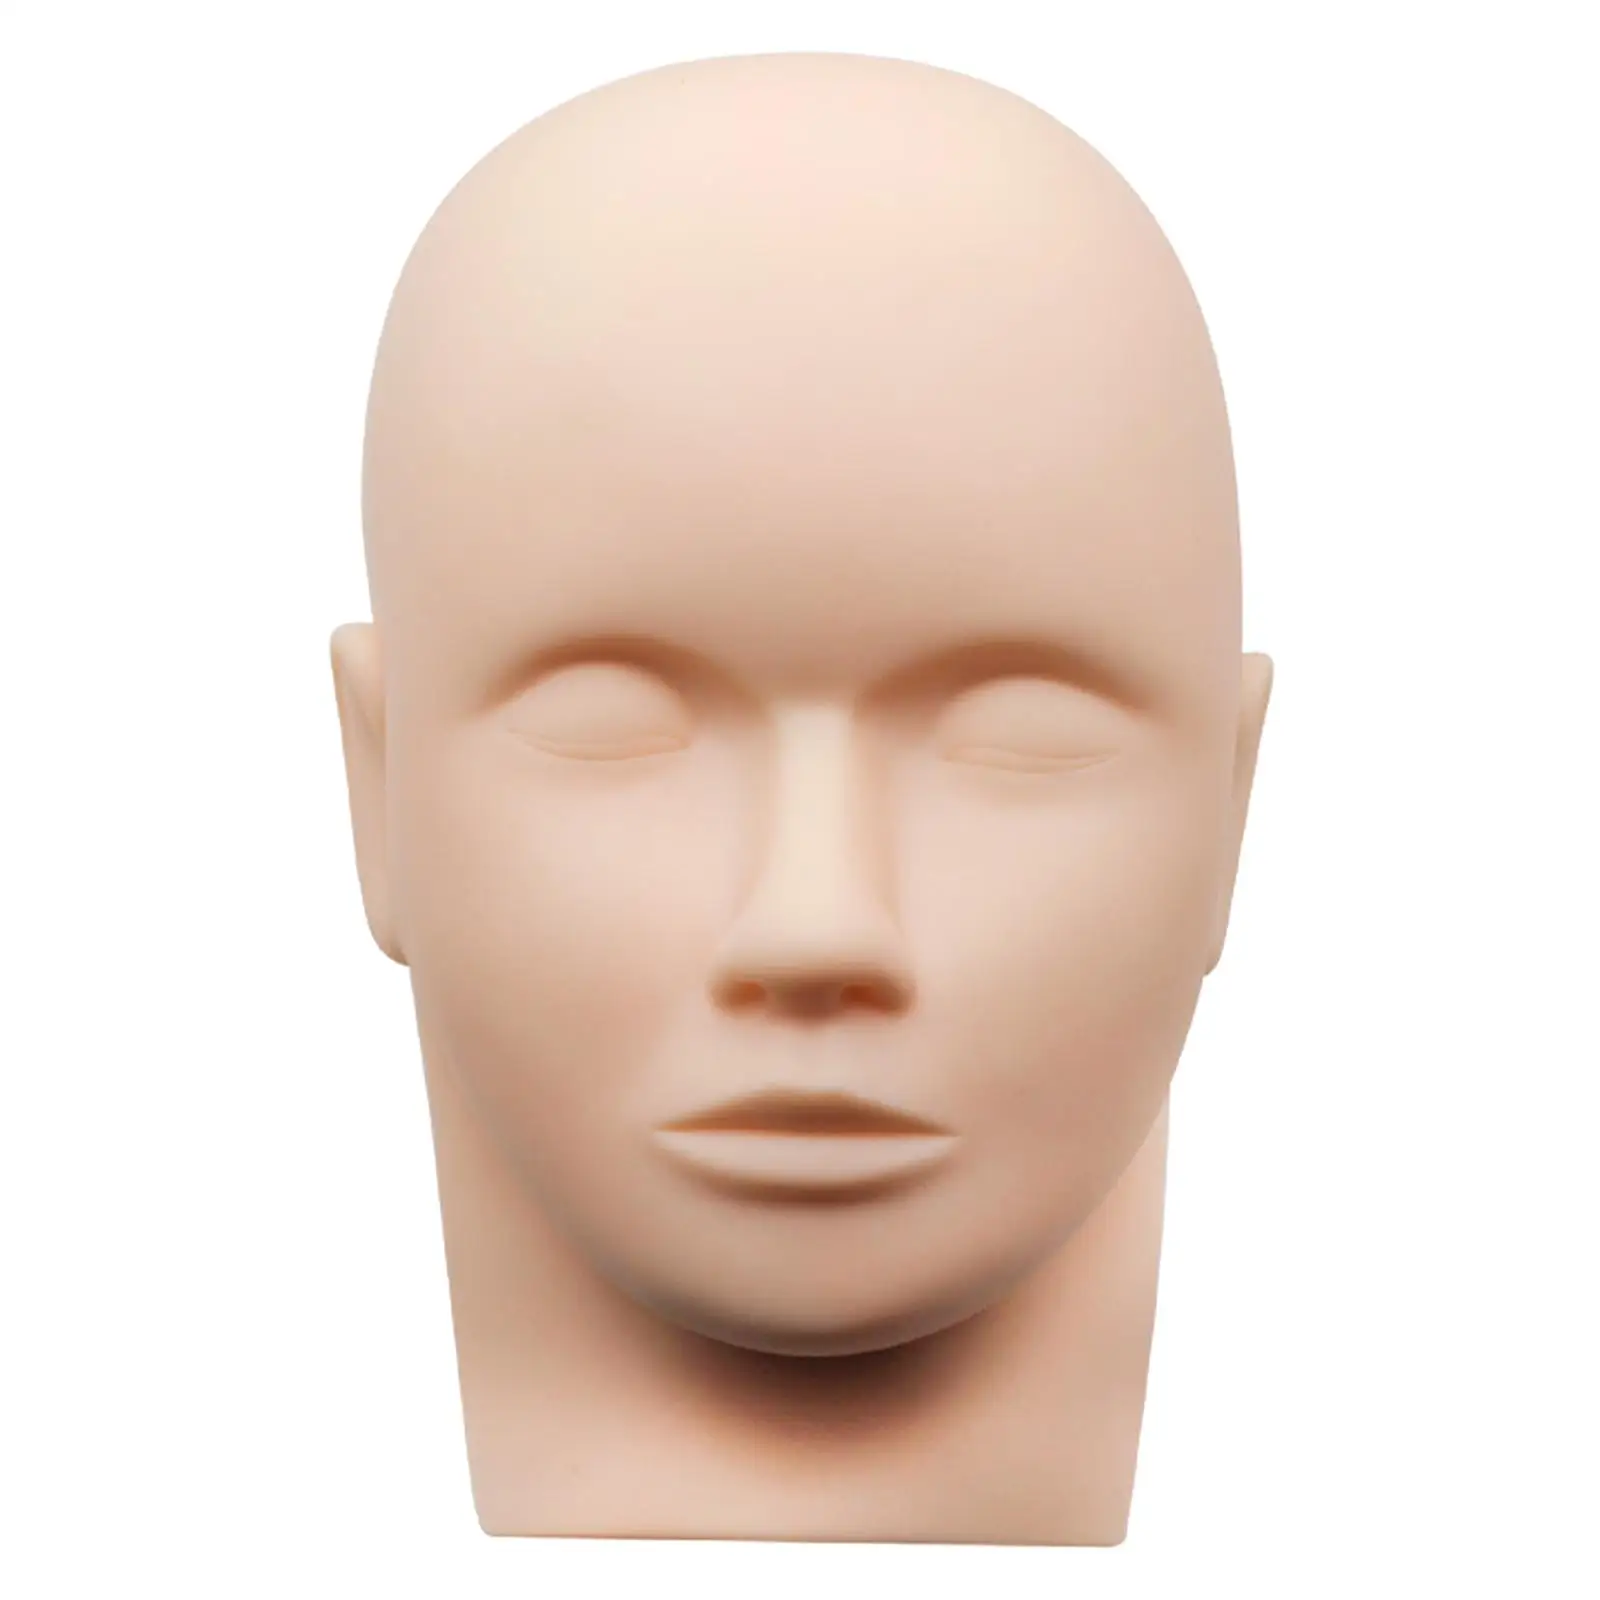 False Eyelash Silicone Head Mold Soft Touch Training Mannequin Head Practice Head Mannequin Make up Training Practice